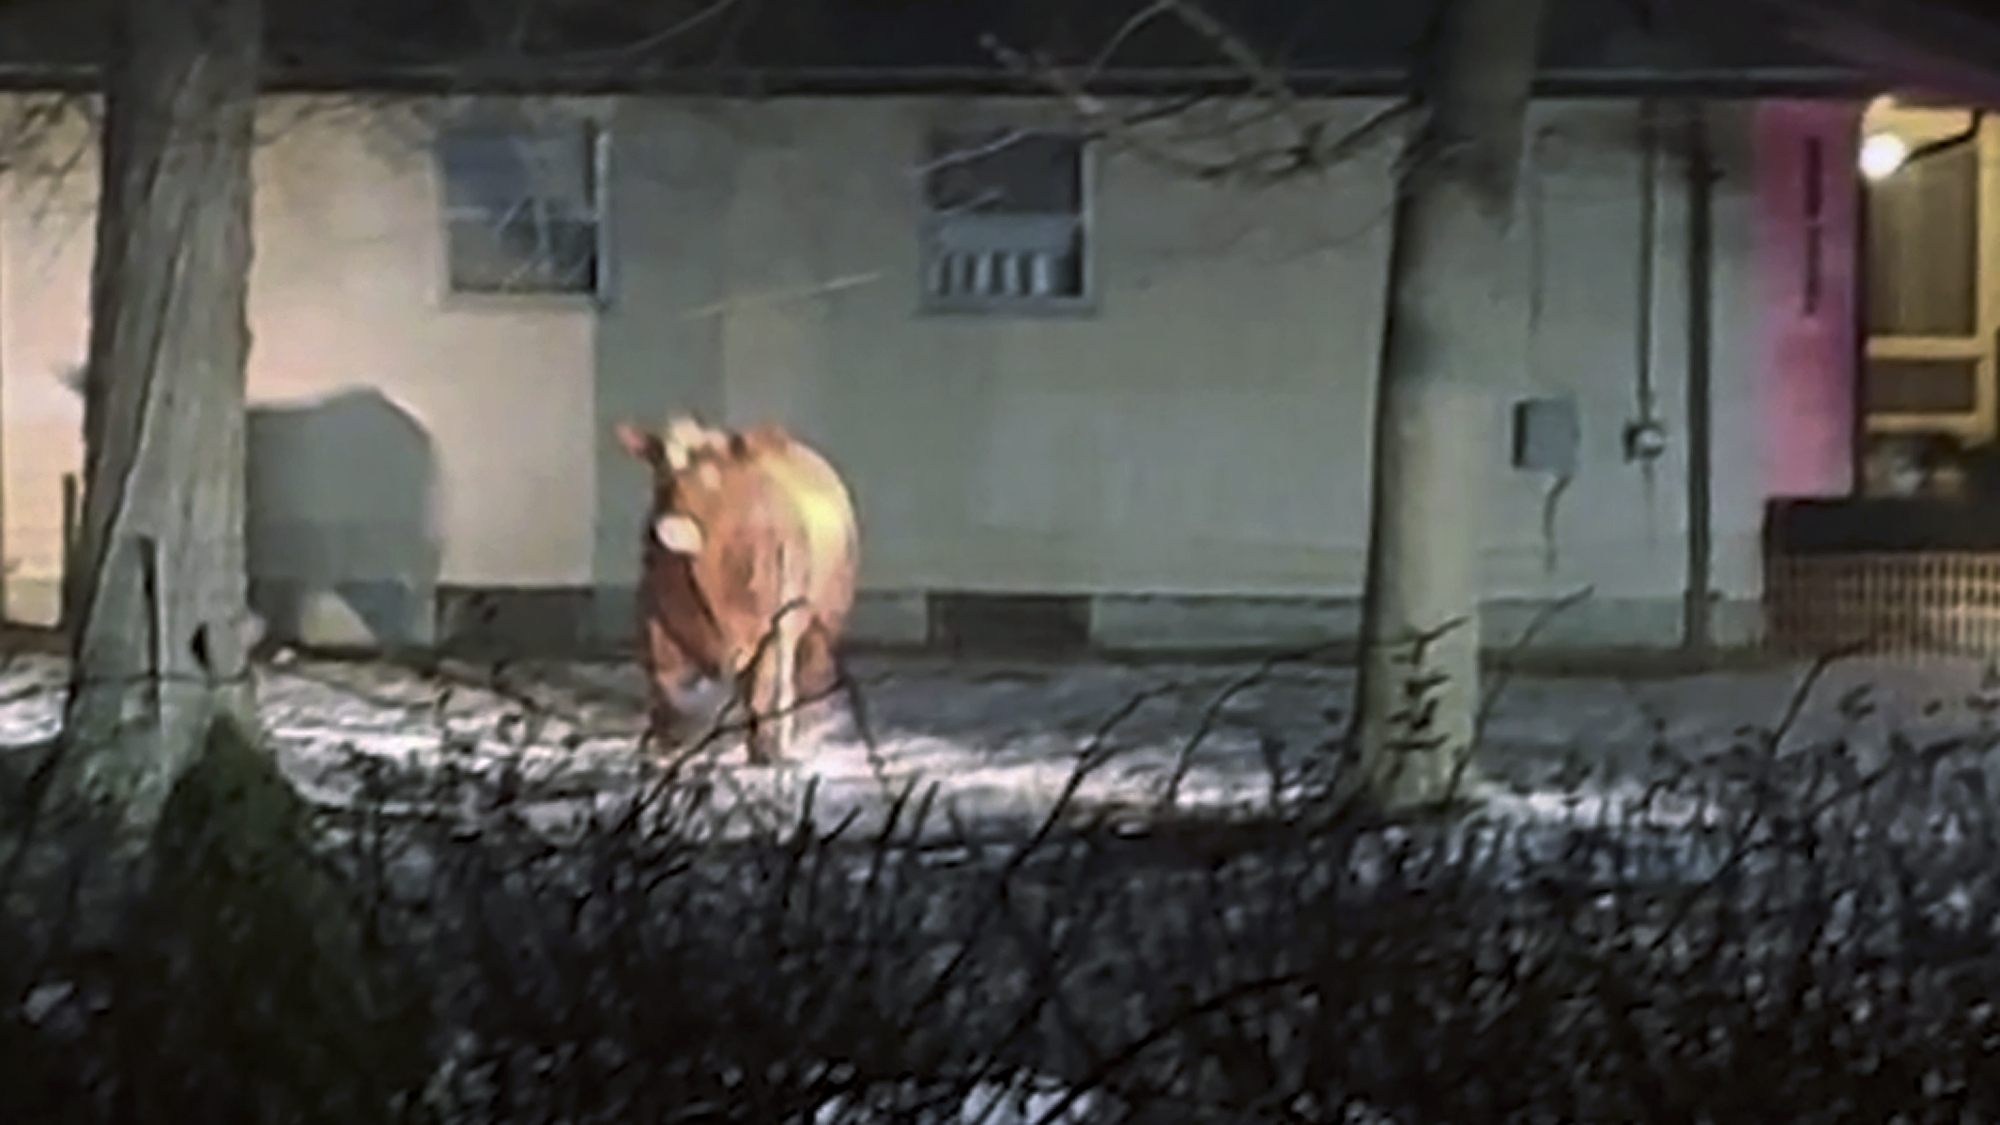 FILE - This Feb. 2021 file photo provided by Adam Seaberg shows a cow that escaped on Feb. 4, in Johnston, R.I., as it was being unloaded at a slaughterhouse. Weeks after escaping, the steer was finally captured unharmed in Johnston by its owner on Friday, March 26, and returned to a Connecticut farm. (Adam Seaberg via AP, File)